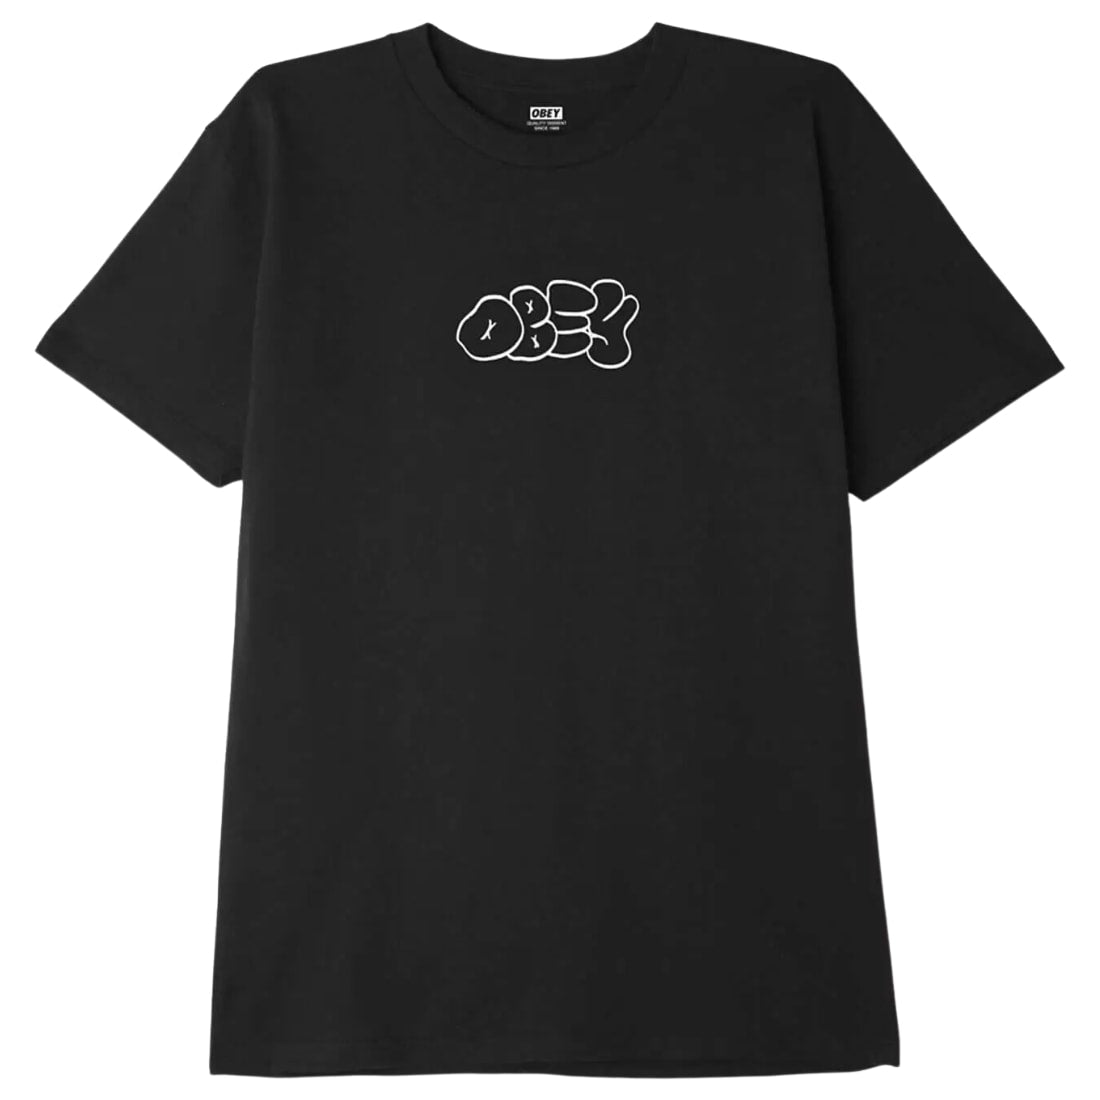 Obey Best Friends T-Shirt - Black - Mens Graphic T-Shirt by Obey